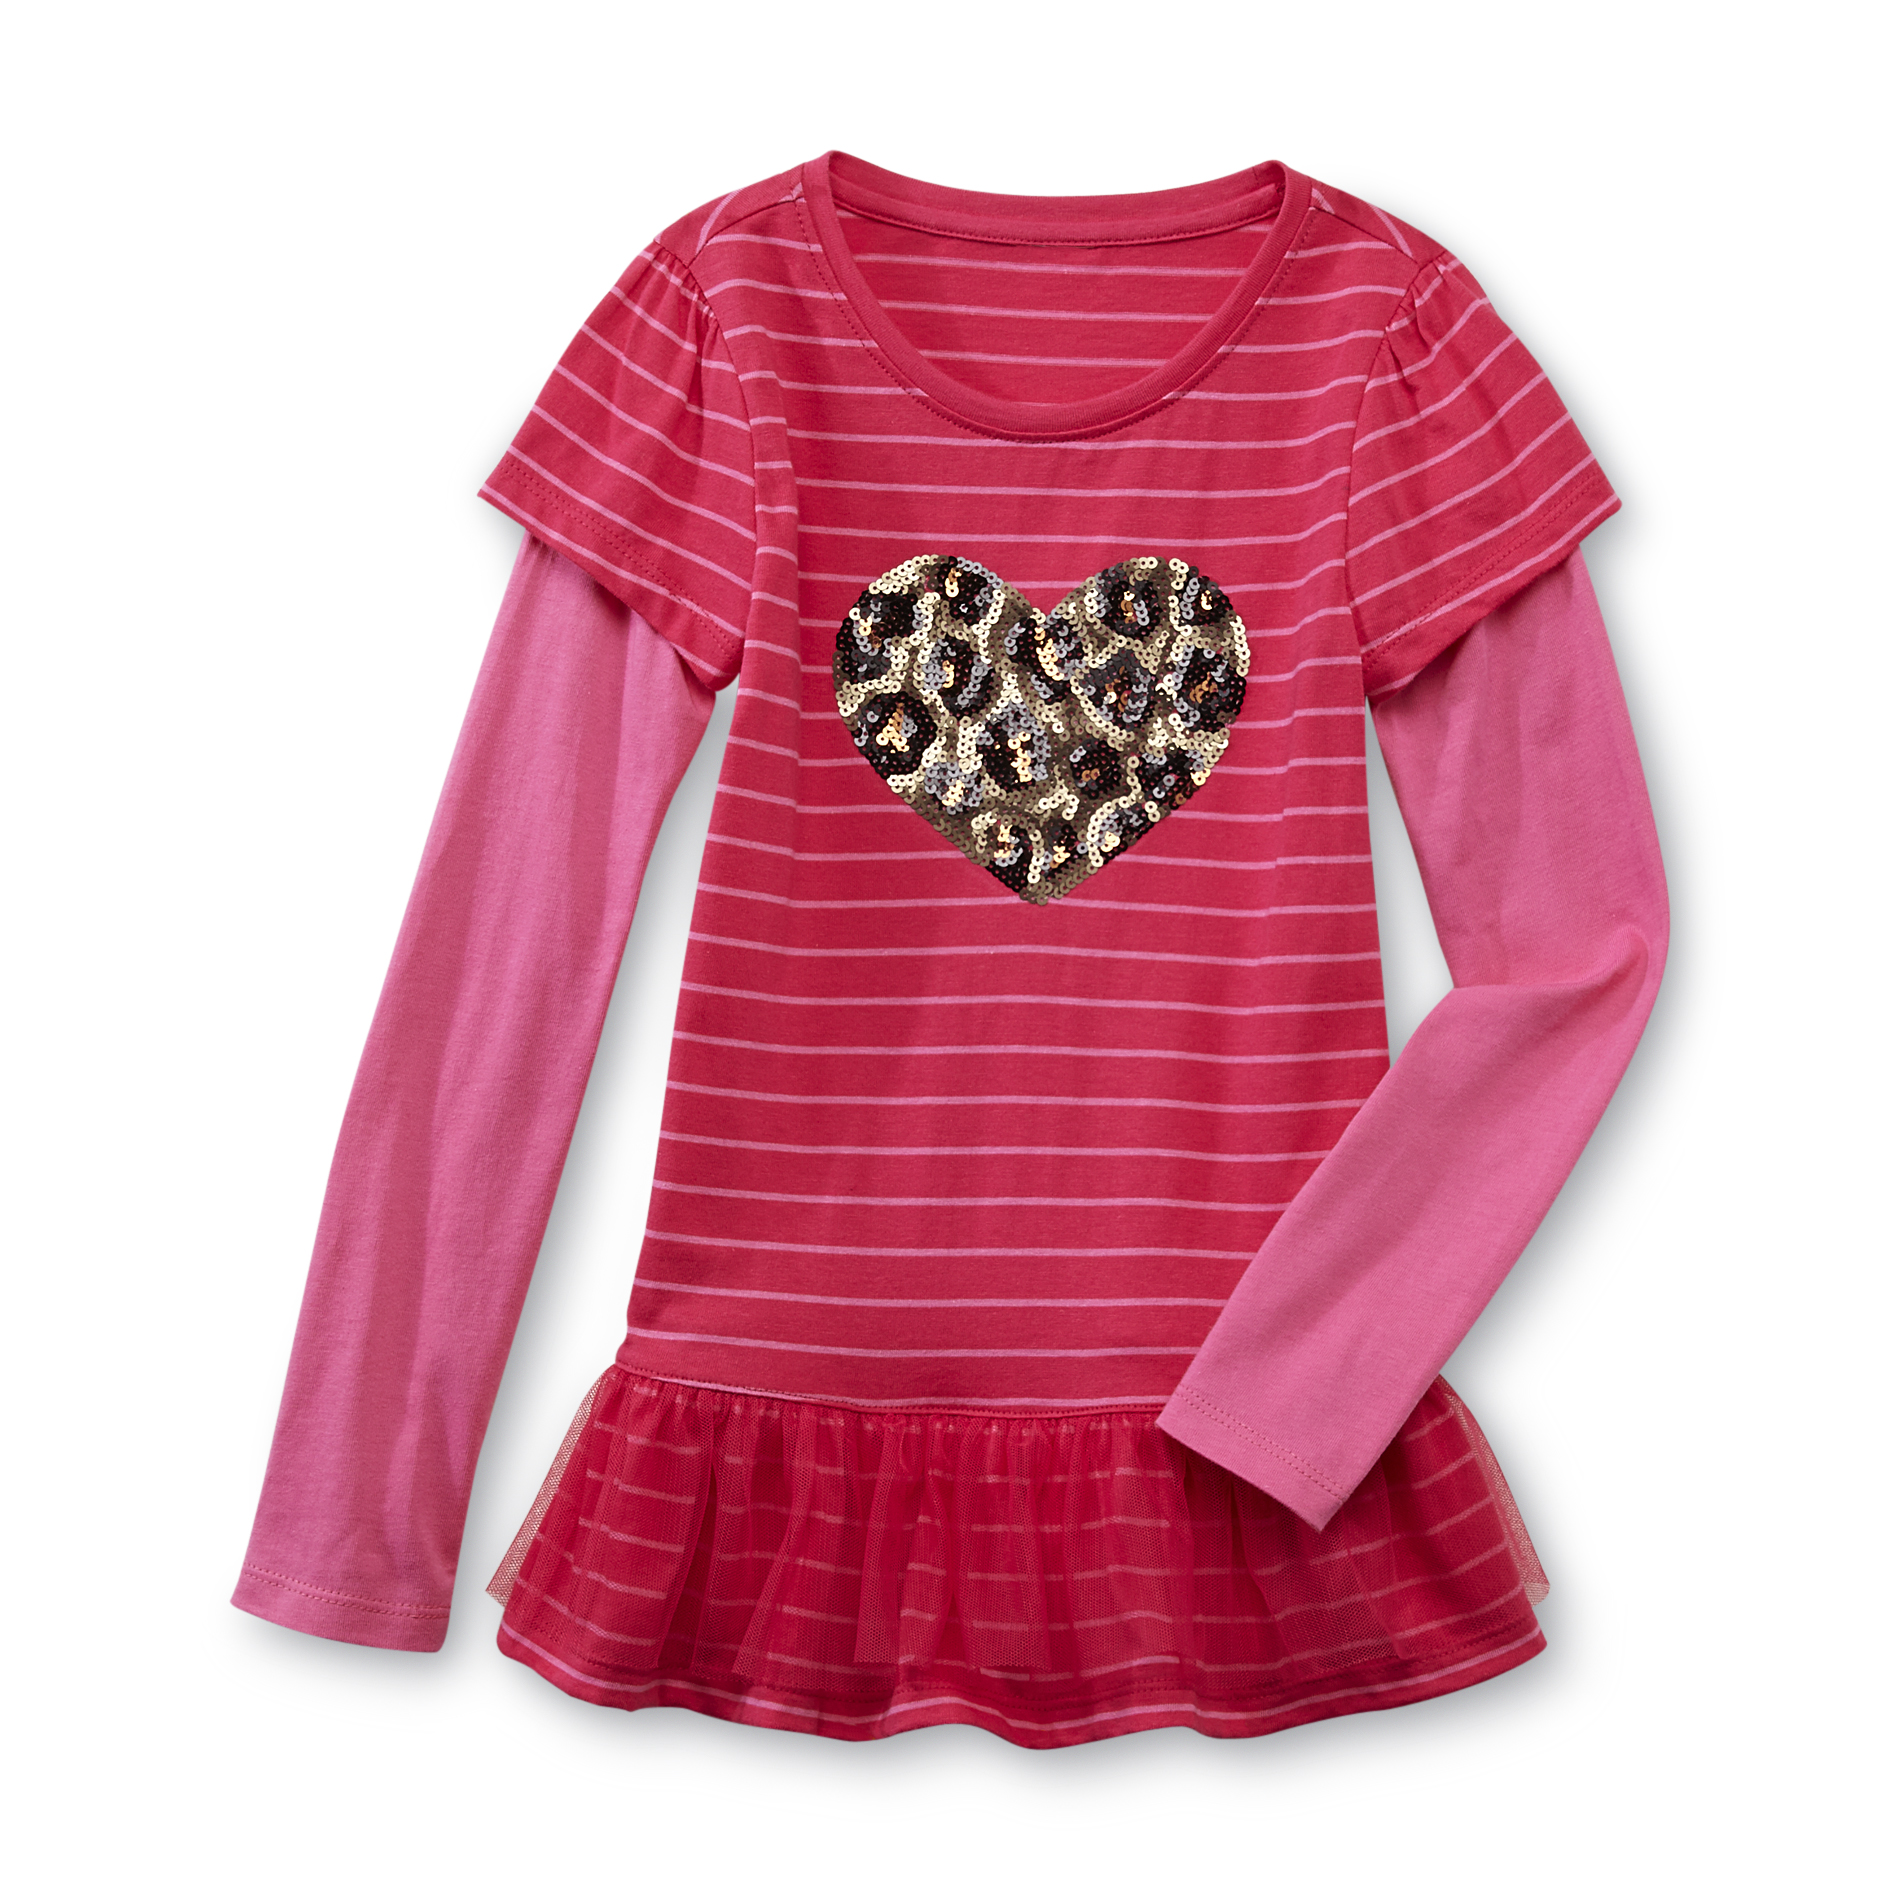 Toughskins Girl's Graphic Tunic Top - Heart & Stripes